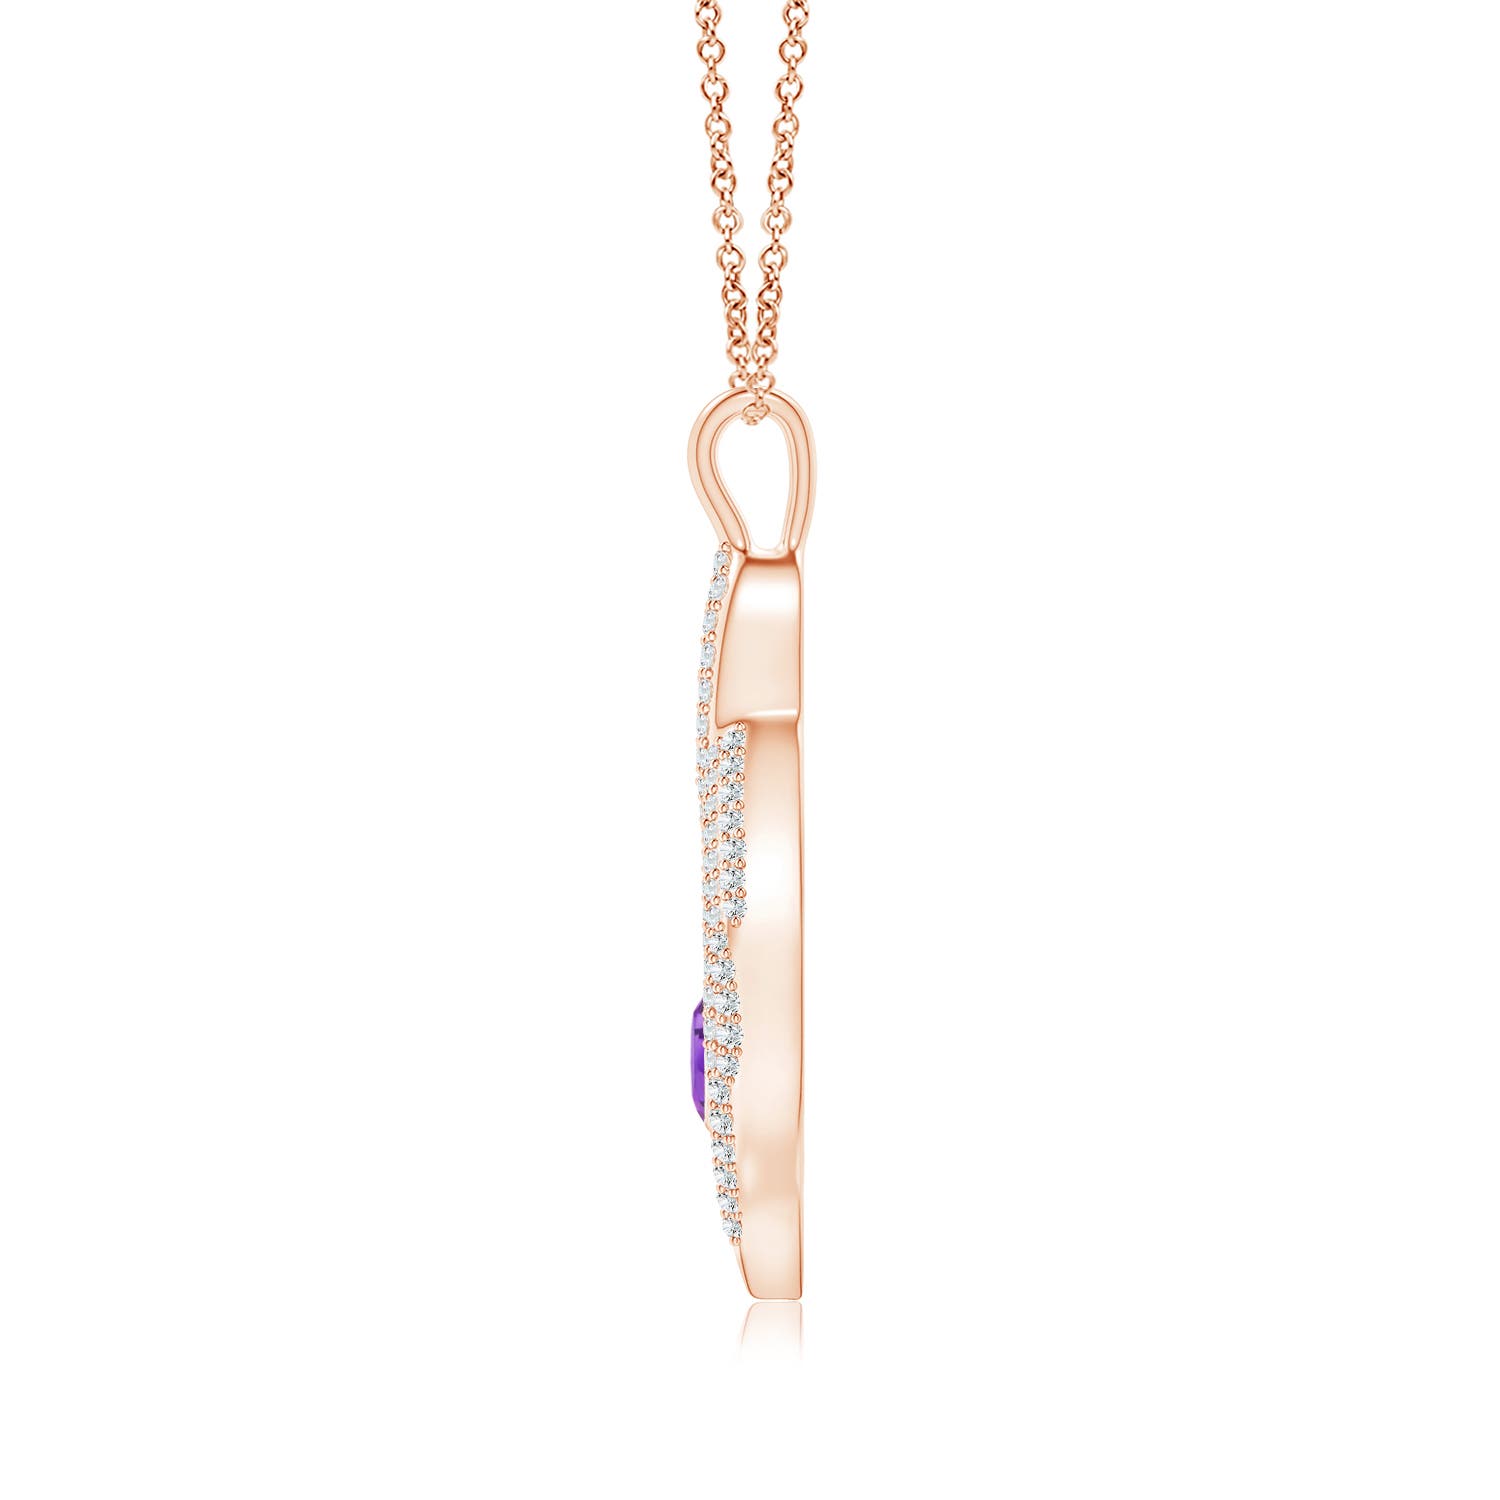 AA - Amethyst / 0.61 CT / 14 KT Rose Gold